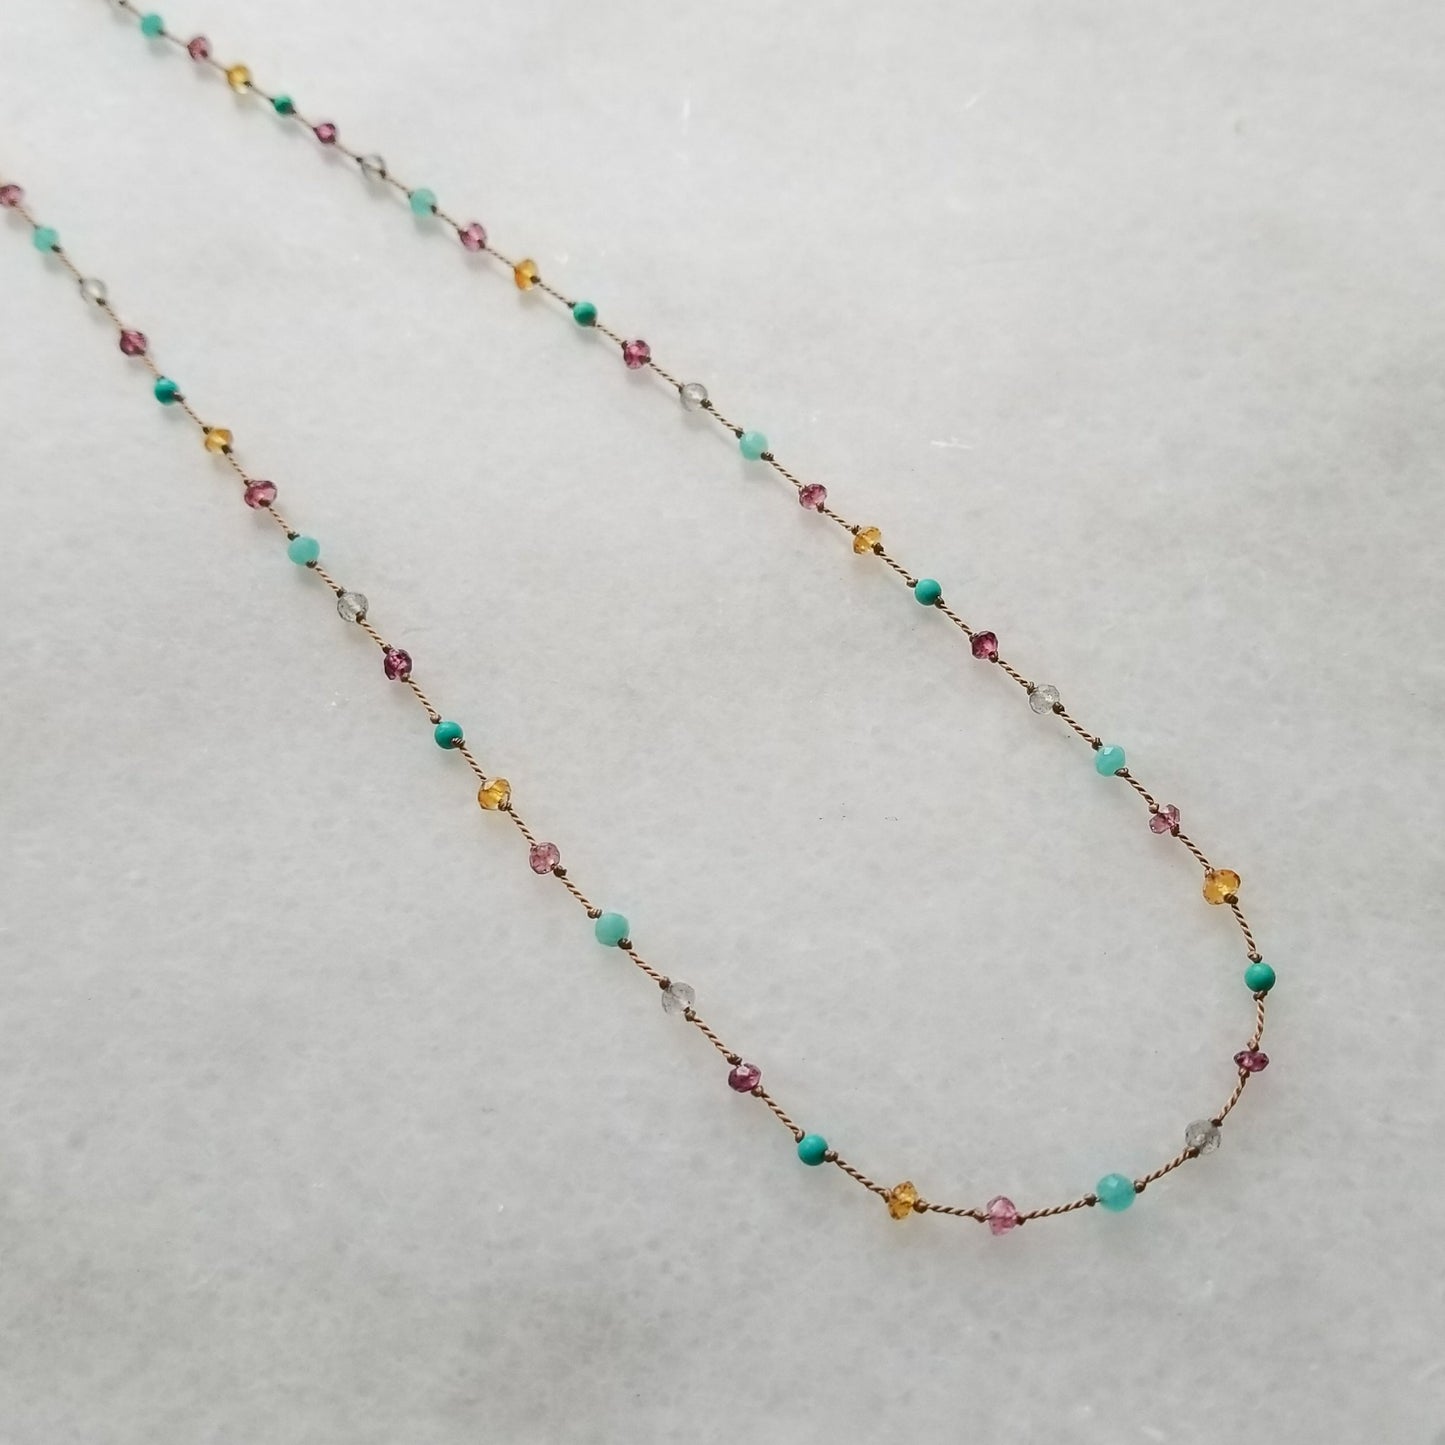 Necklace featuring citrine, labradorite, amazonite, turquoise, pink tourmaline, and garnets evenly spaced, knotted on beige silk cord, is displayed on a white marble background.